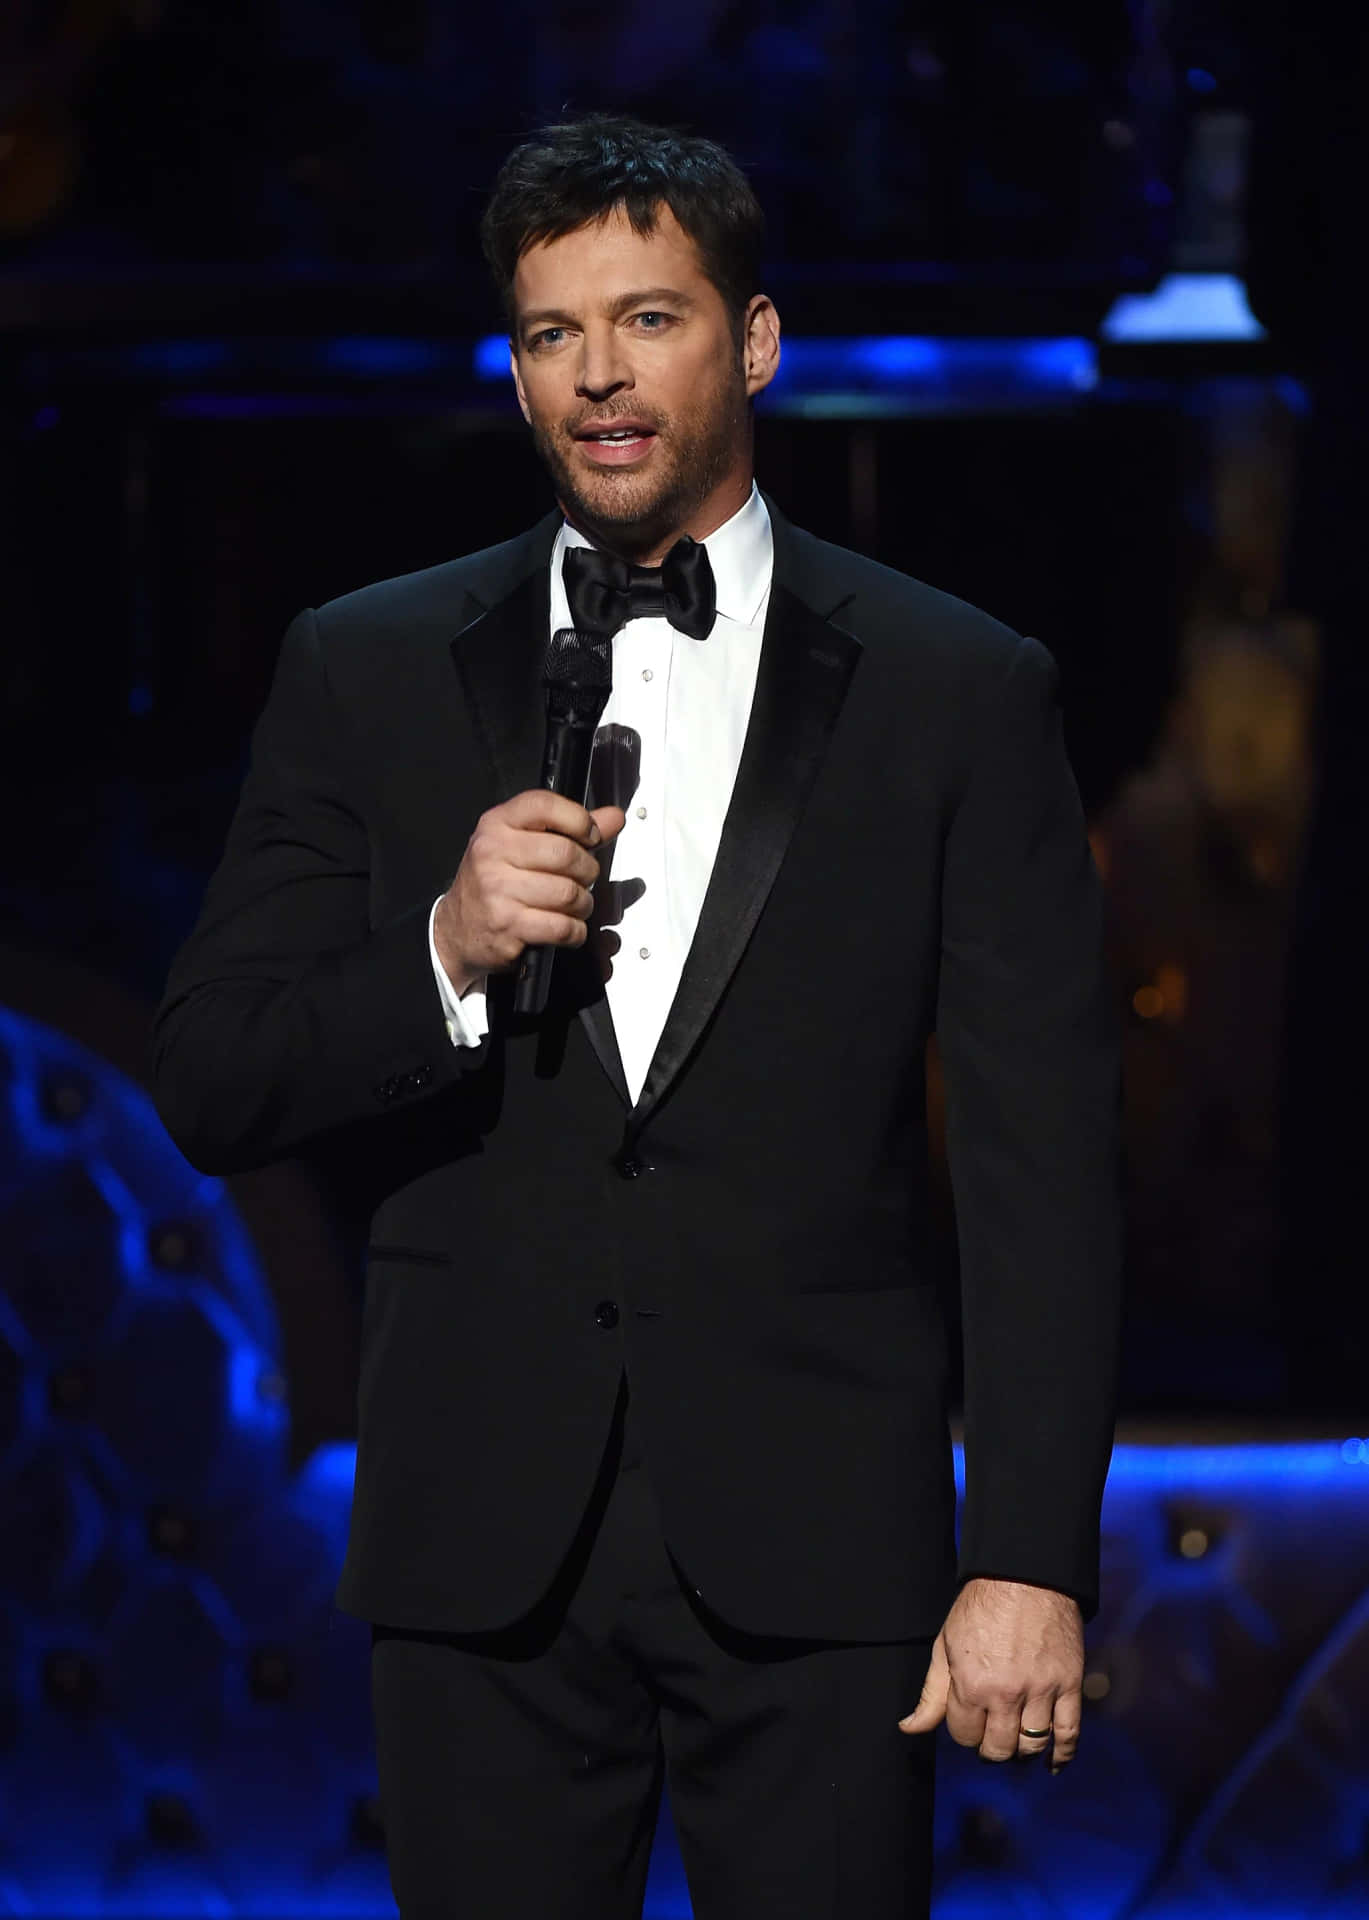 Harry Connick Jr. performing live on stage Wallpaper